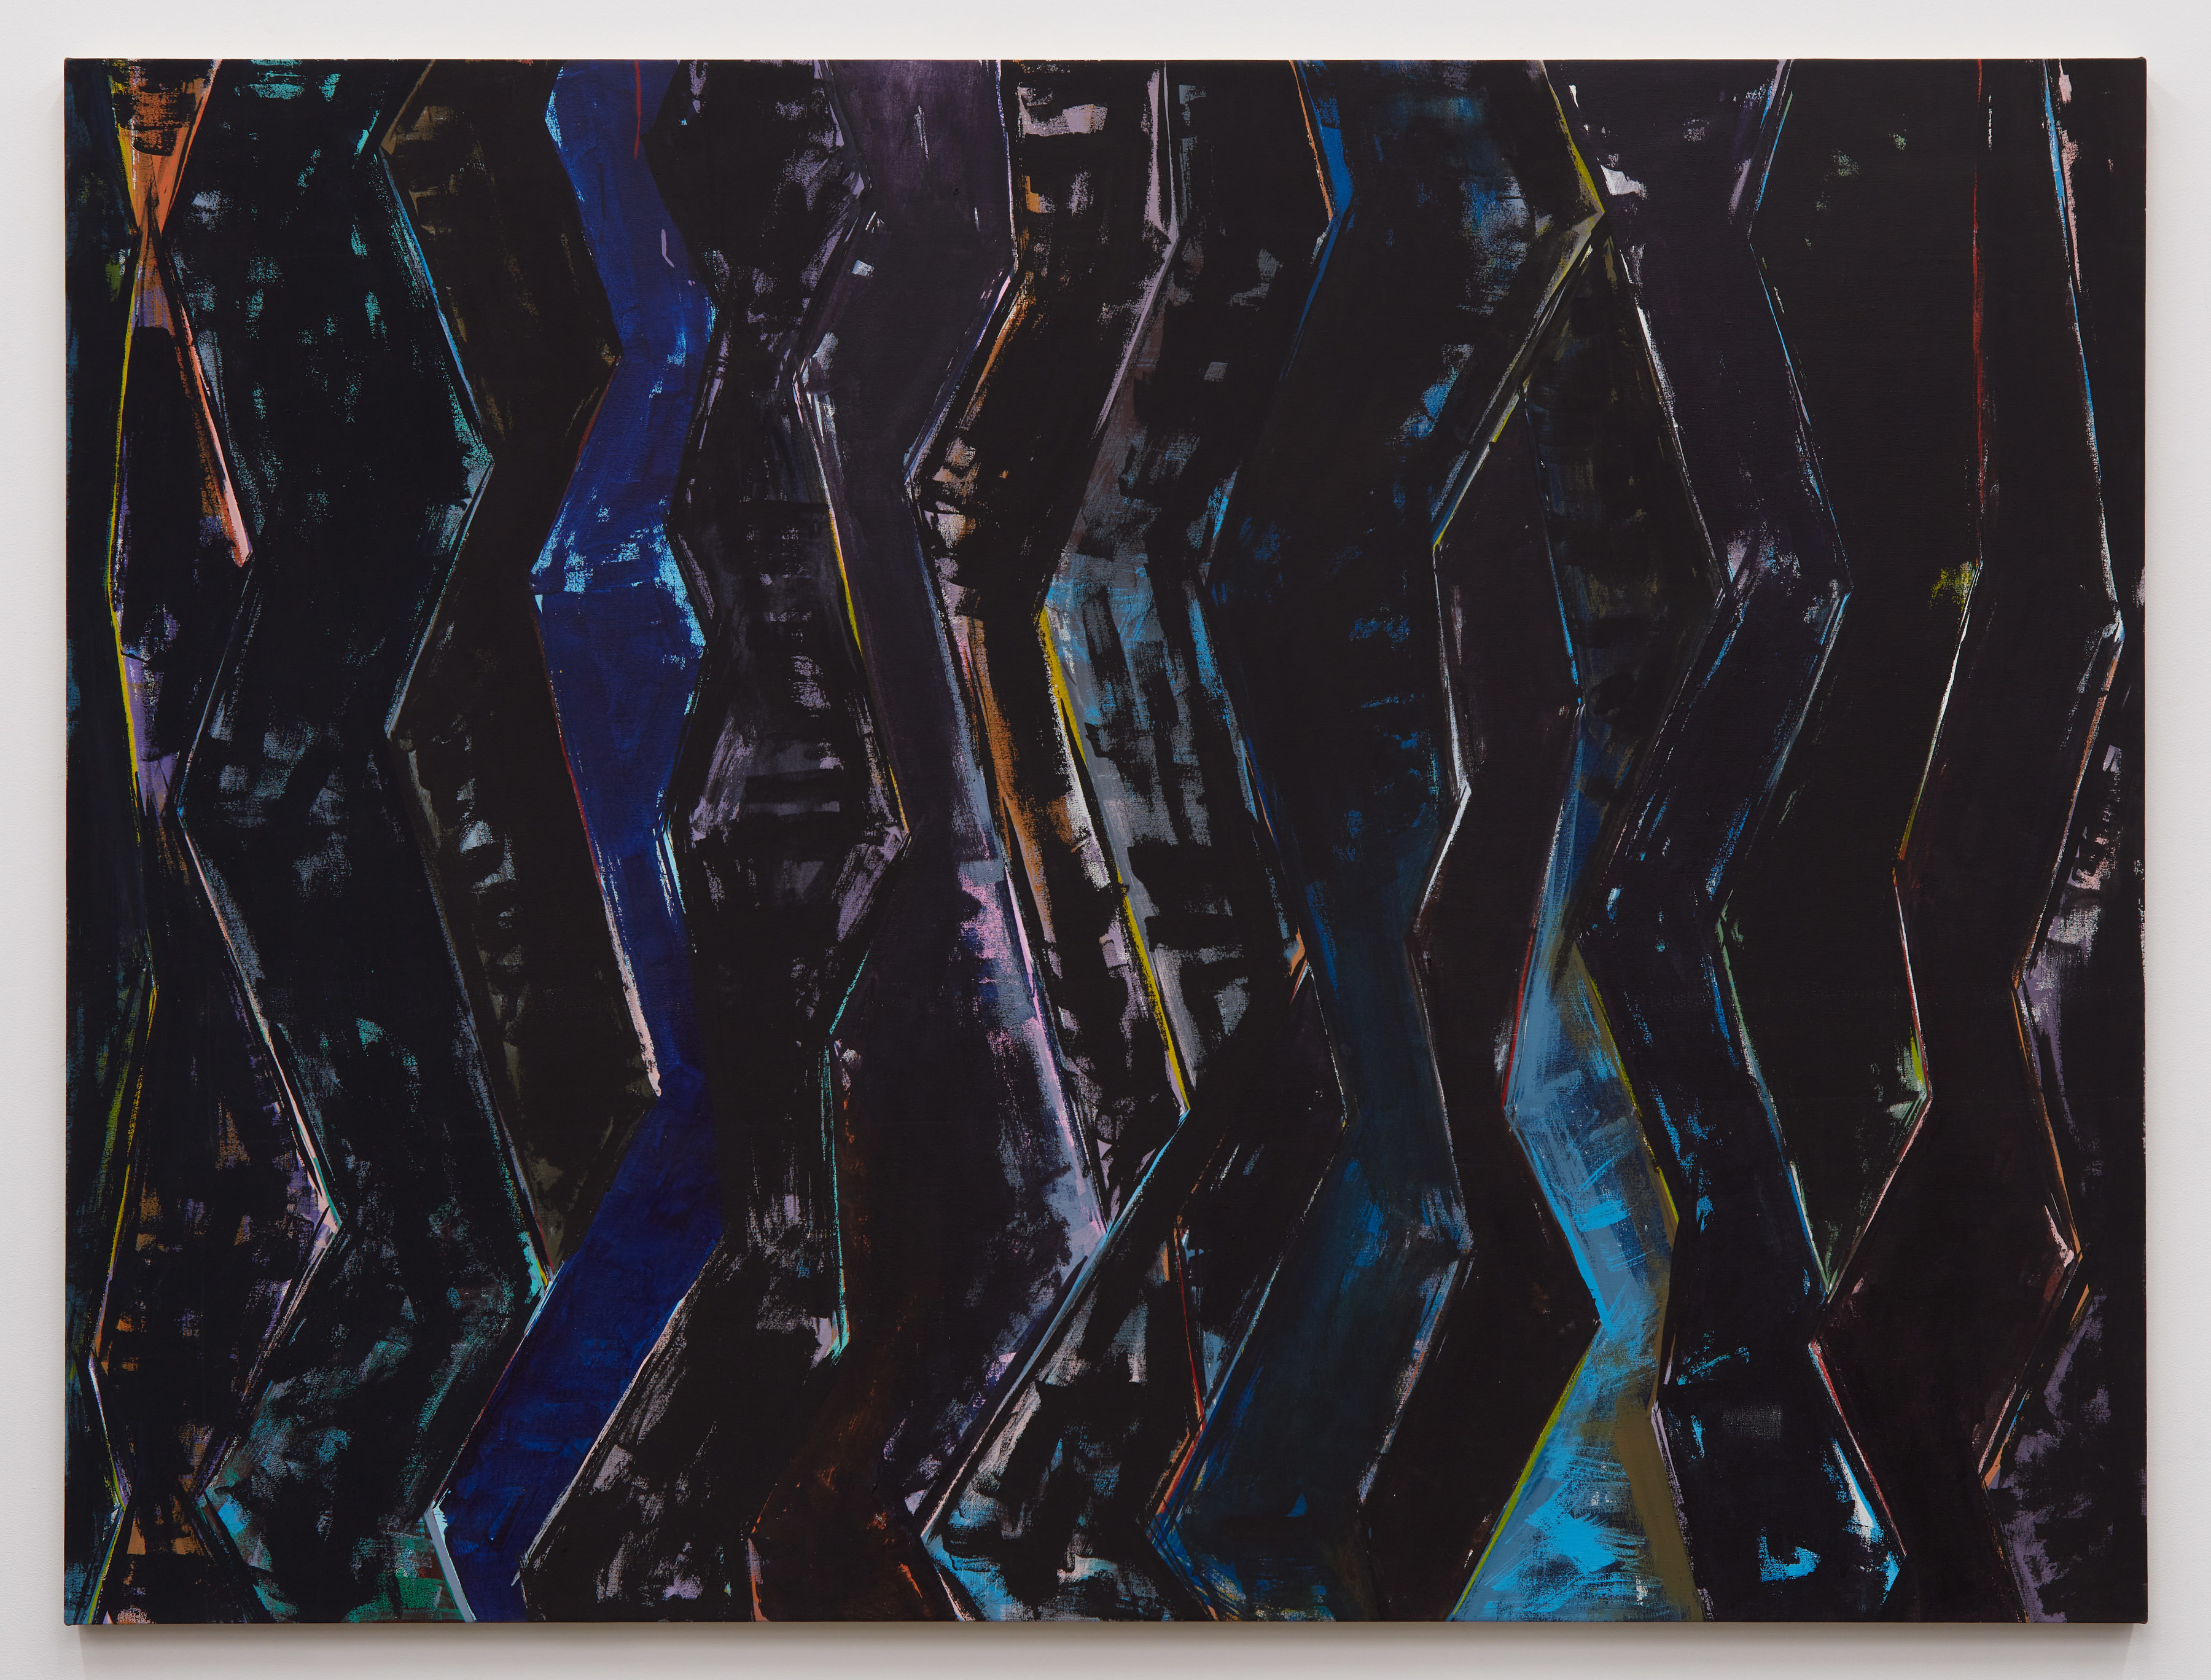 The Prospects of Painting: Robert Duran’s New York Years - Features - Independent Art Fair